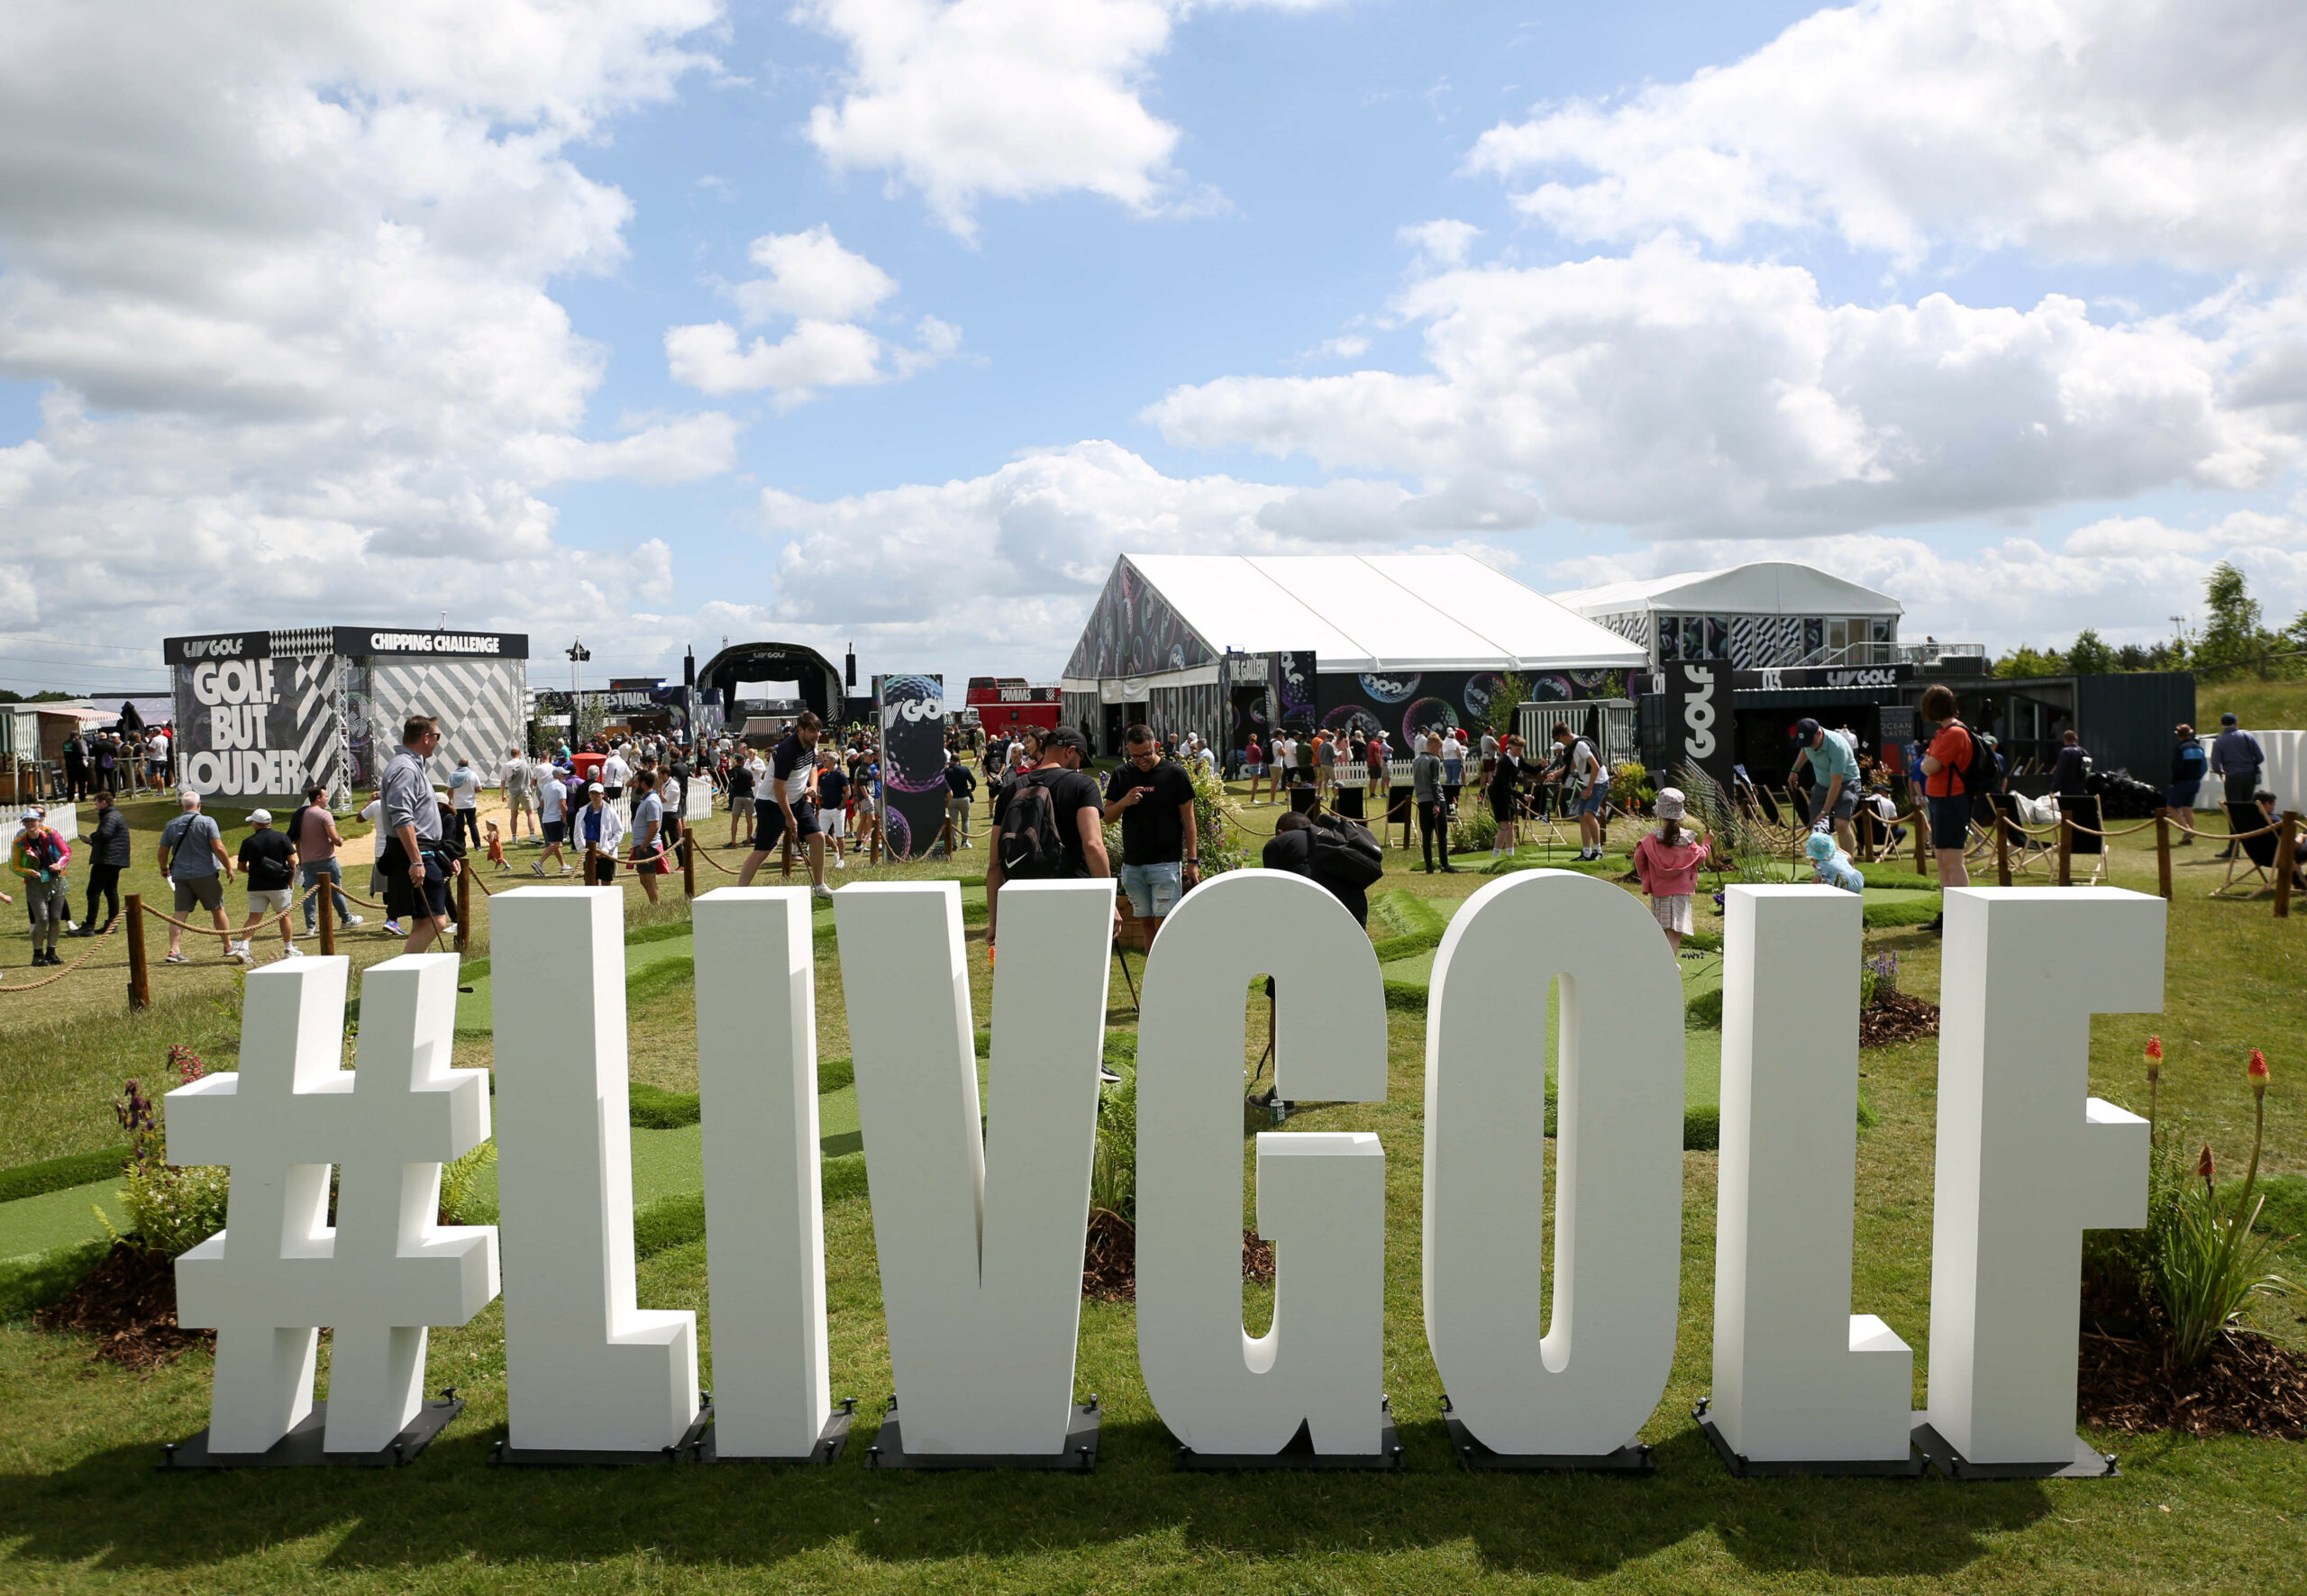 The main figures in the merger between the PGA Tour and LIV Golf have been asked to attend a United States Senate hearing